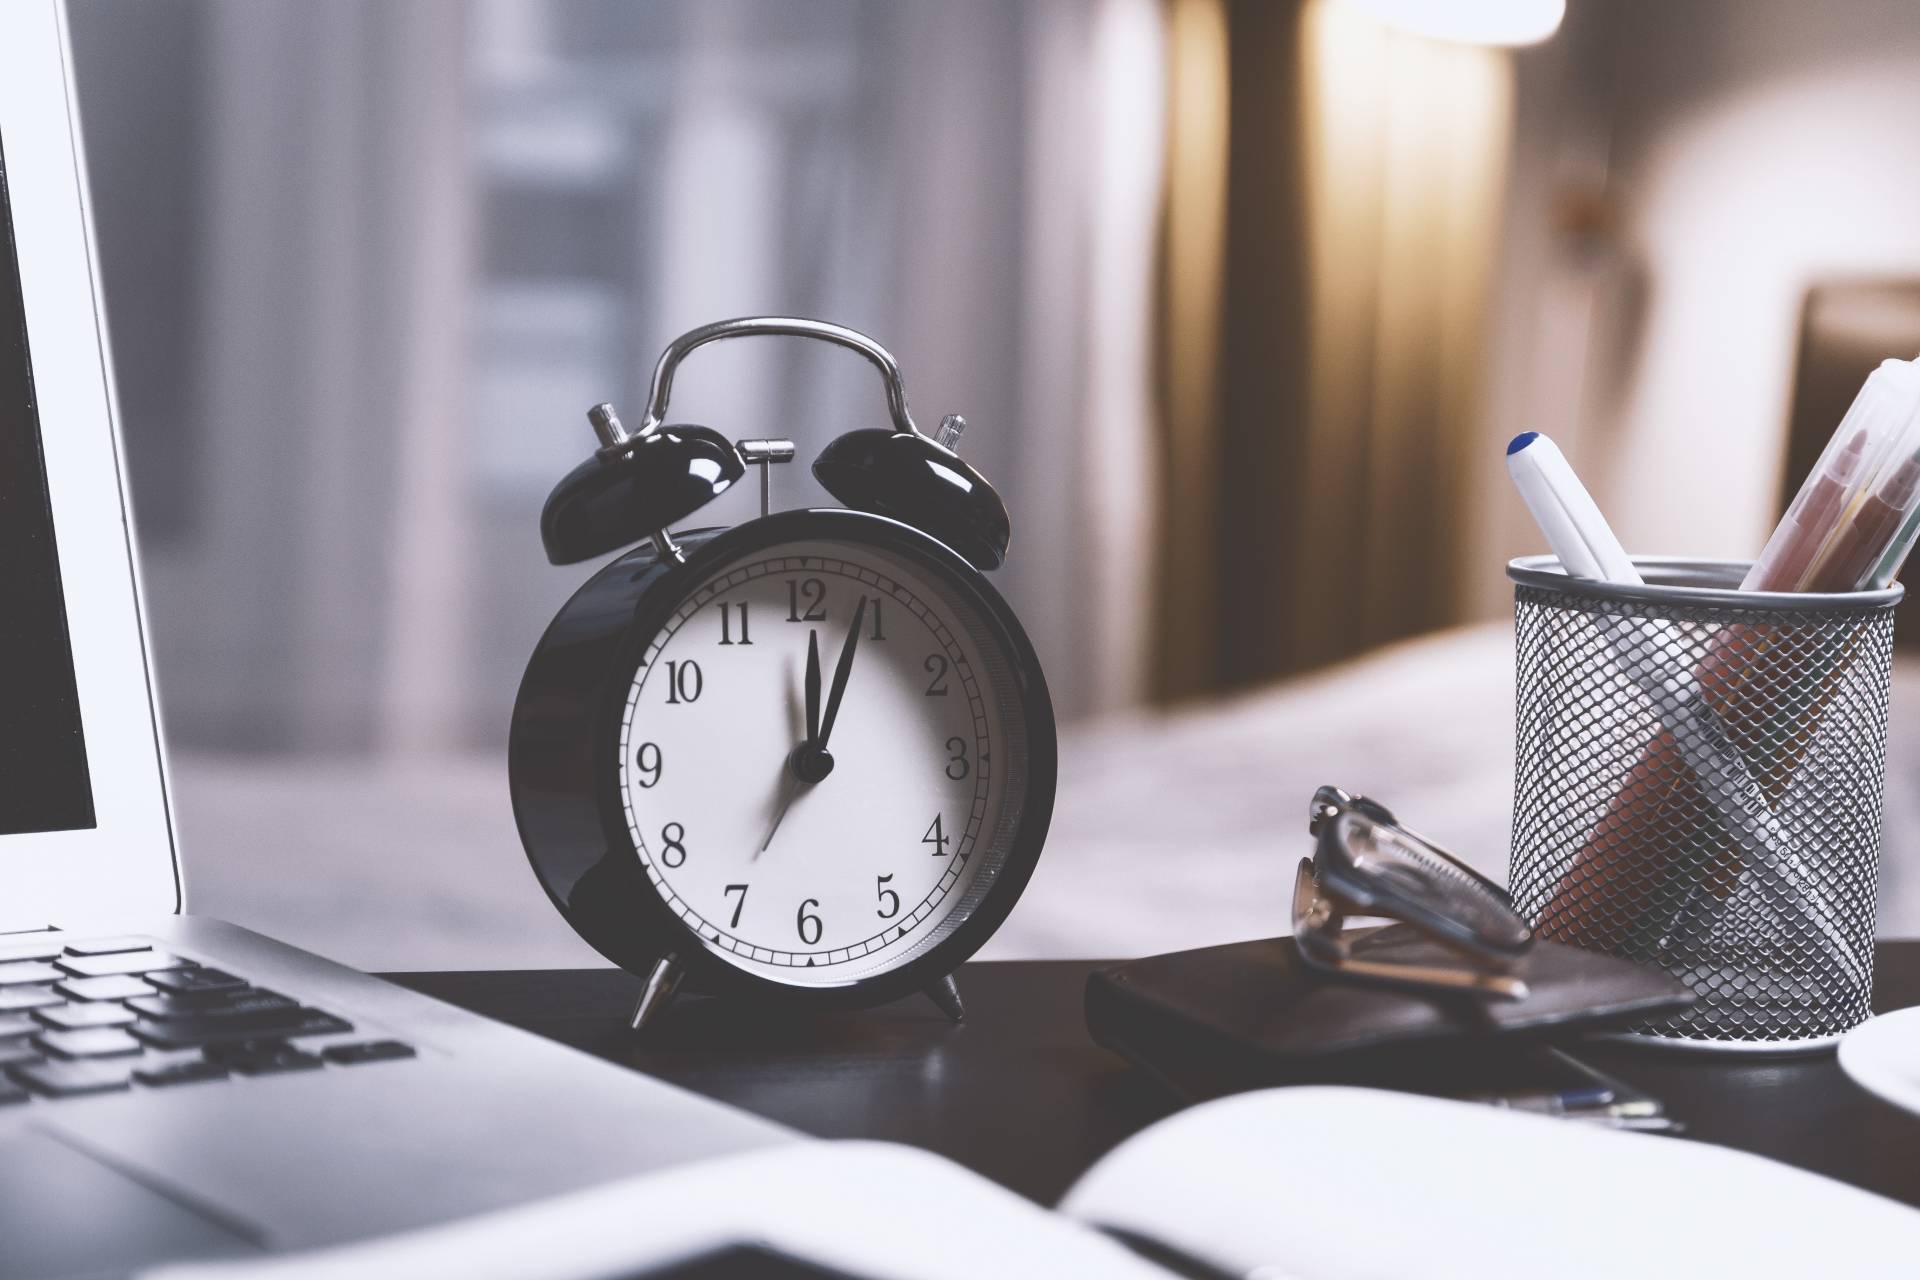 5 Time Management Myths (Updated for 2022)